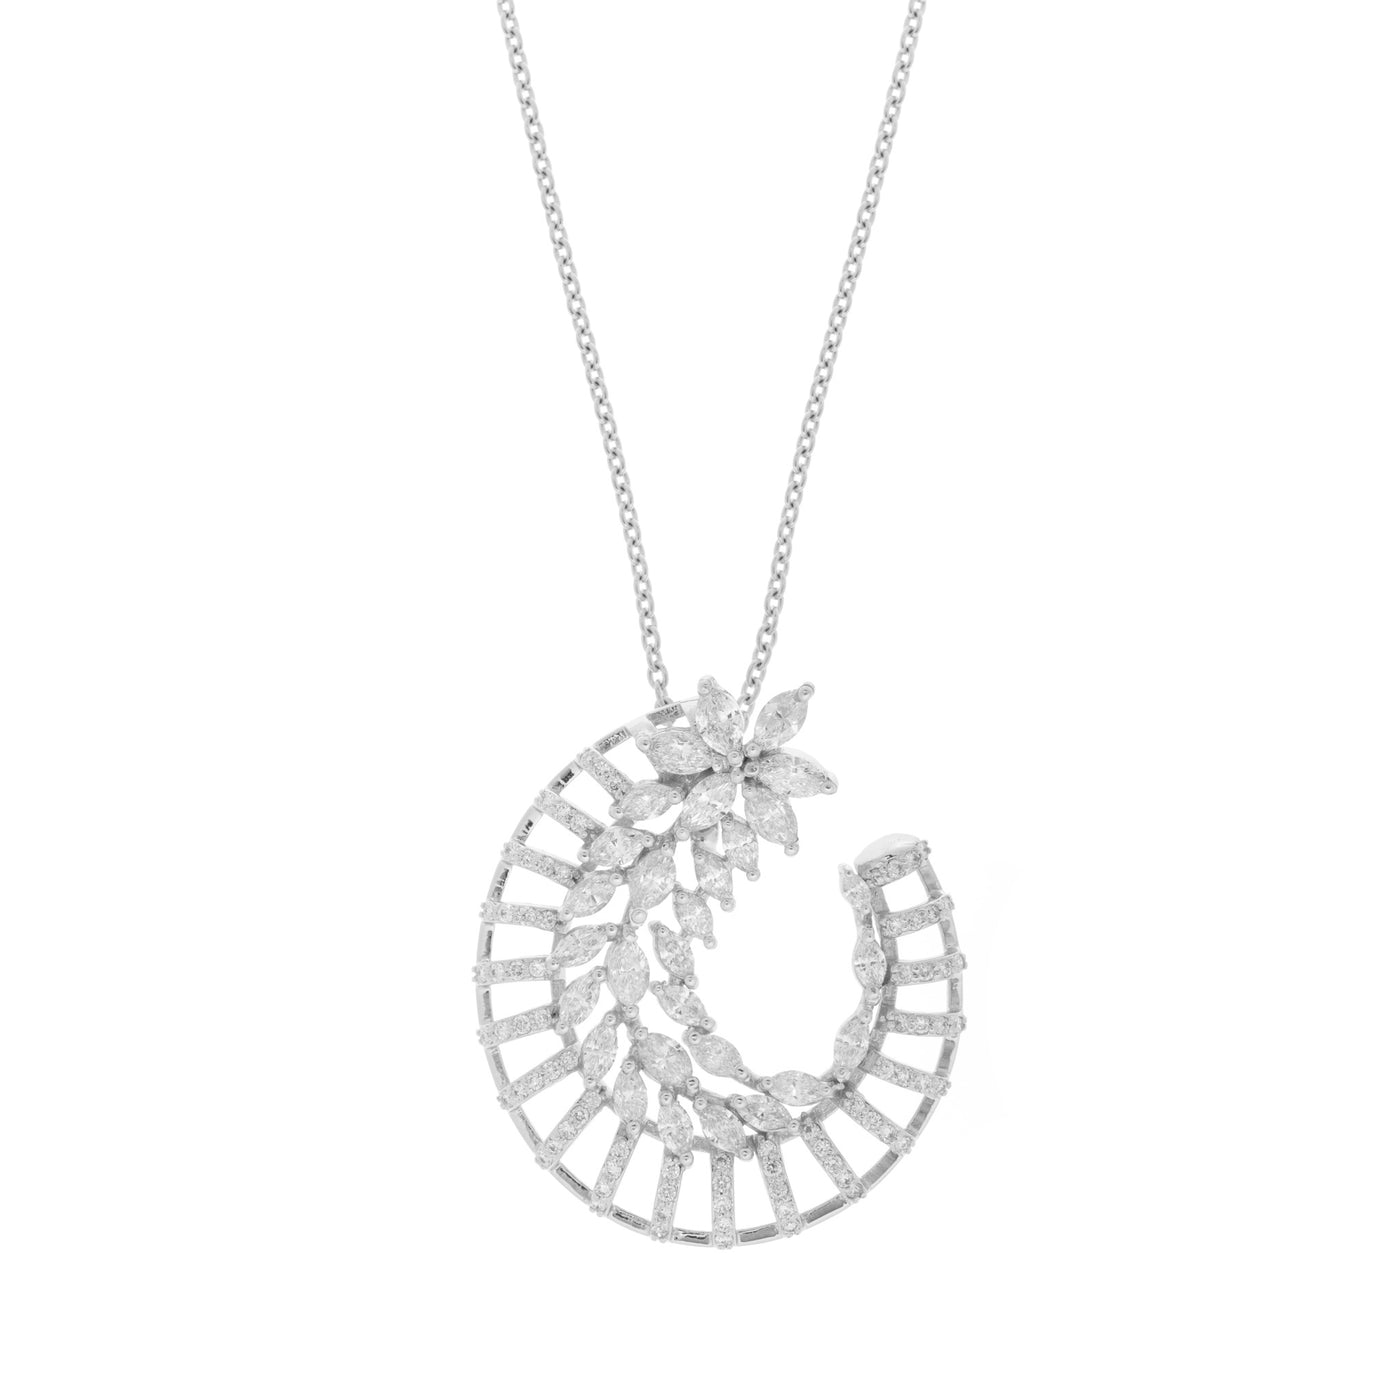 Soit Belle White Gold Diamond Pendant with Marquise Cut Half Oval.